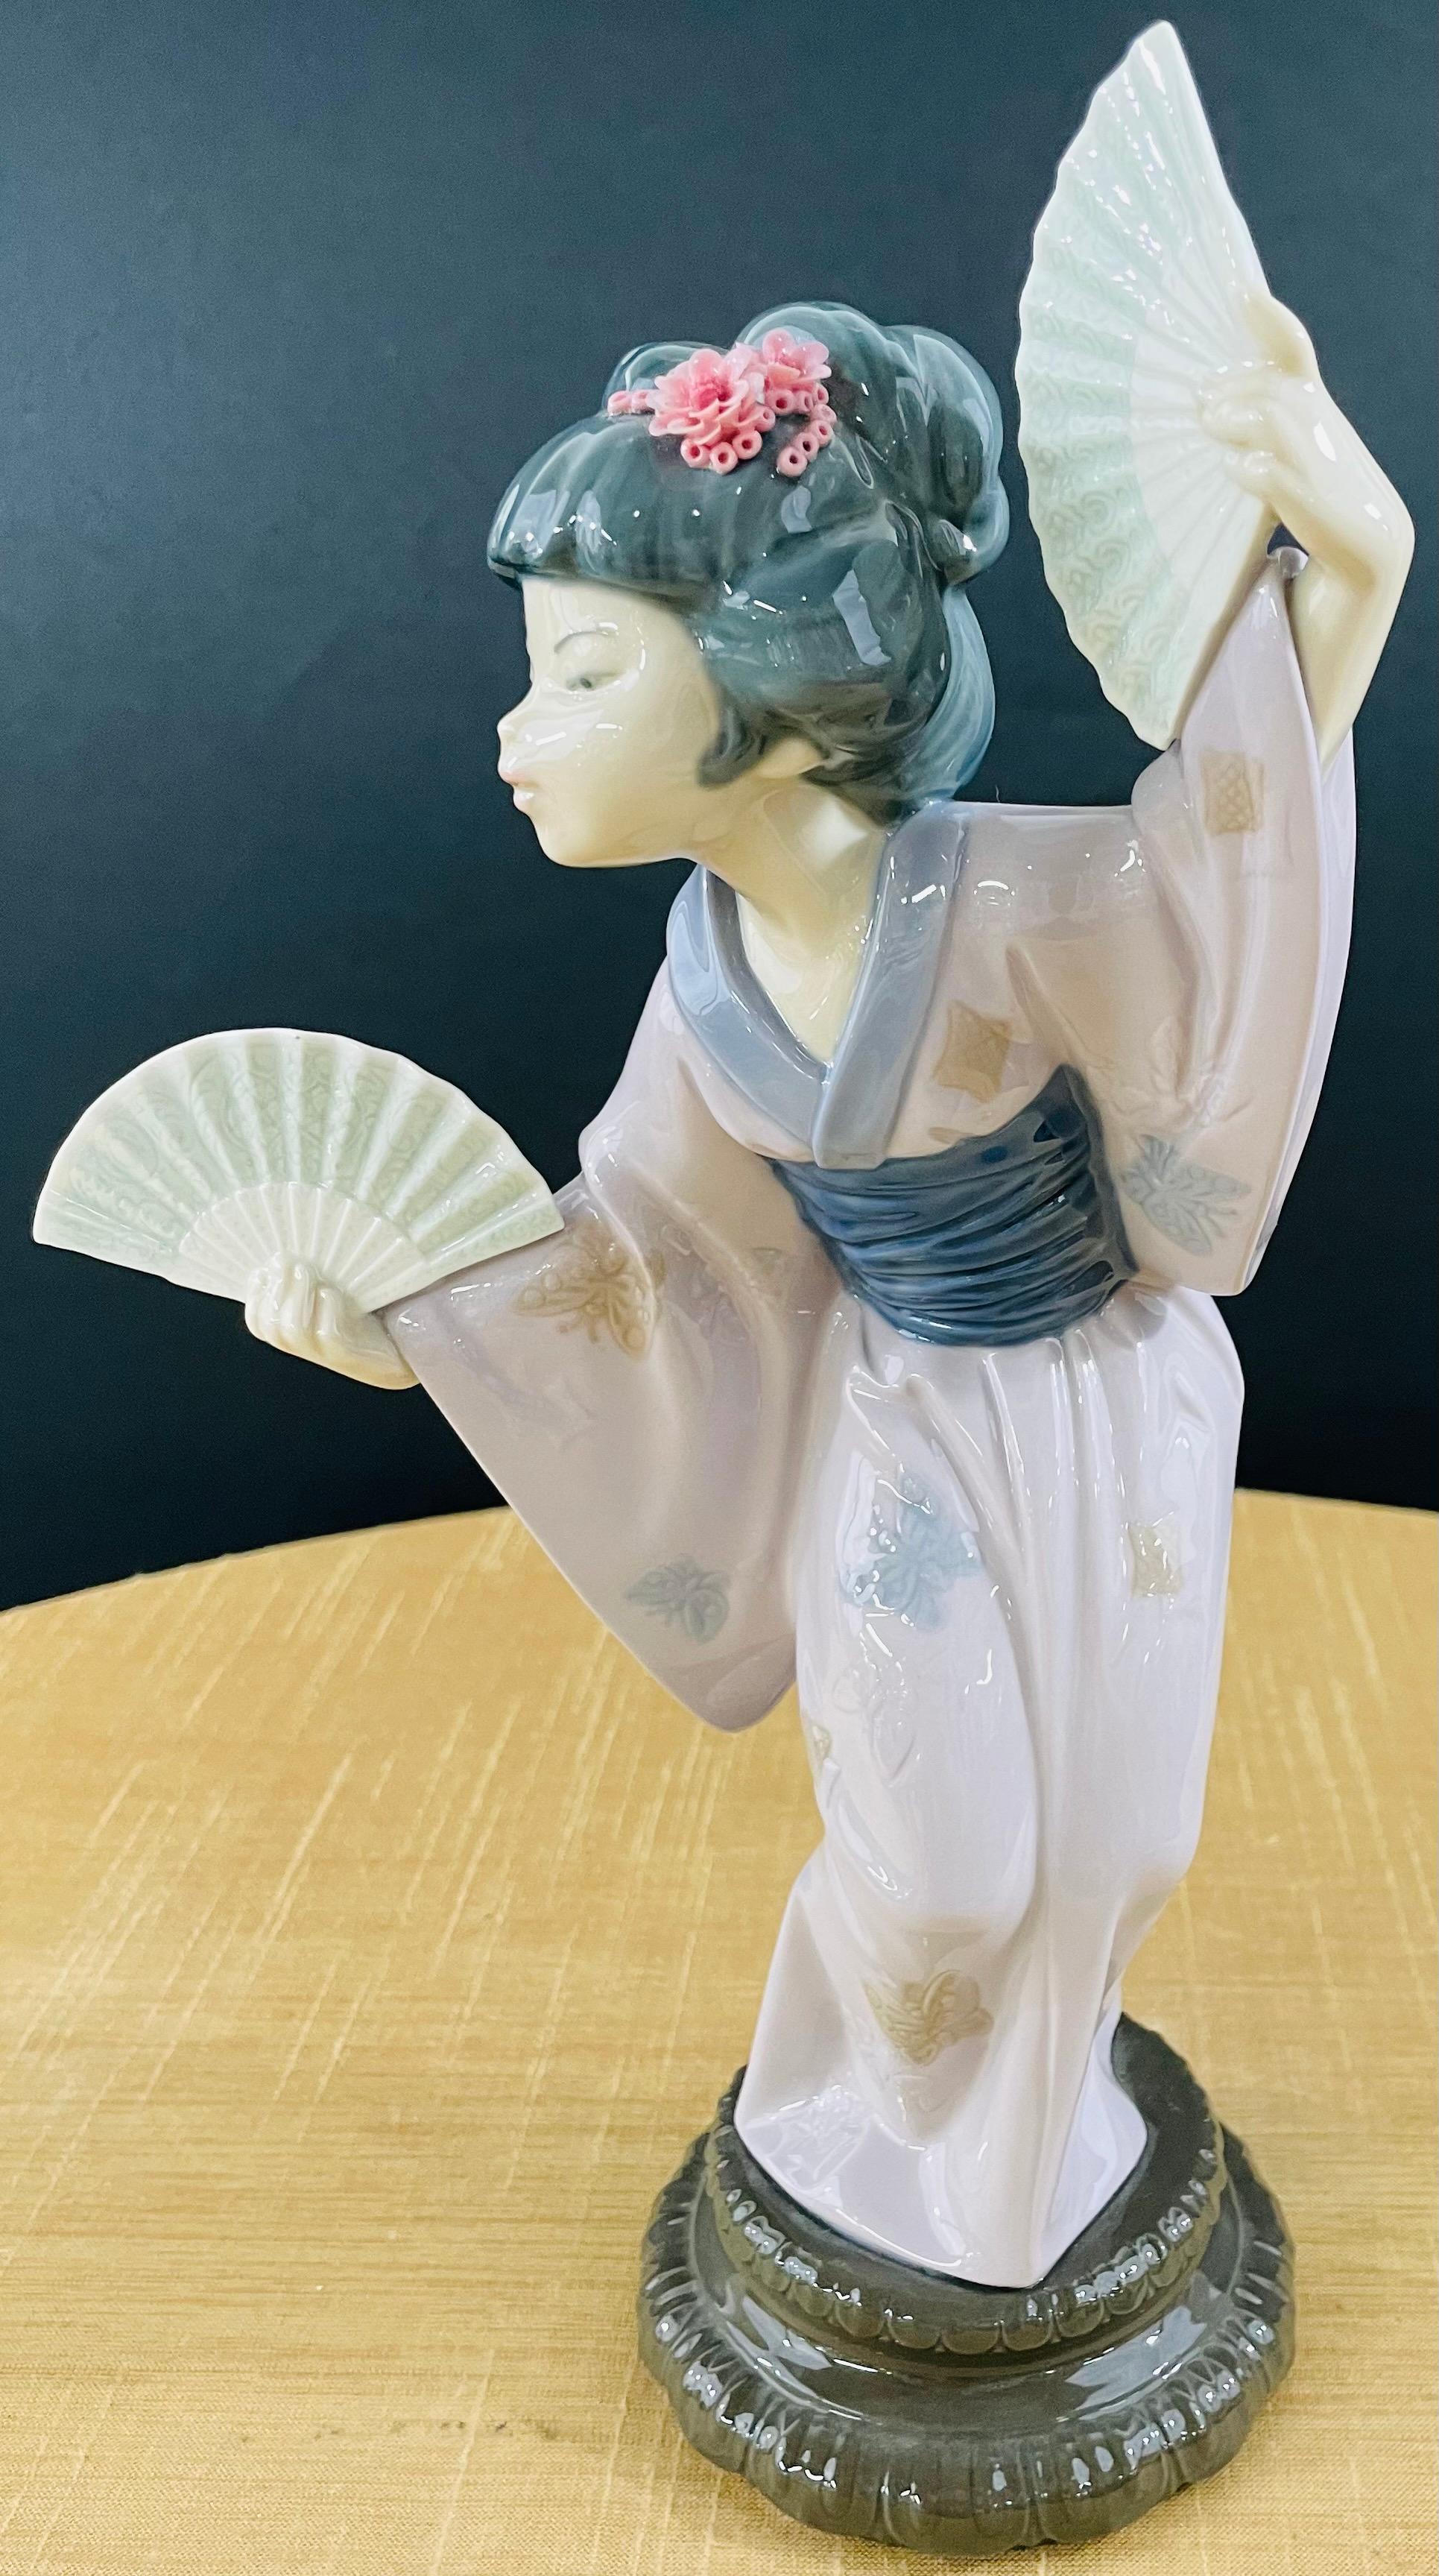 A 1970's Lladro figurine of a Madame Butterfly Japanese Geisha holding a fan. The figurine is signed by the maker and dated 1978. The figurine is numbered 4991 and retired. 

Dimensions: 5.75